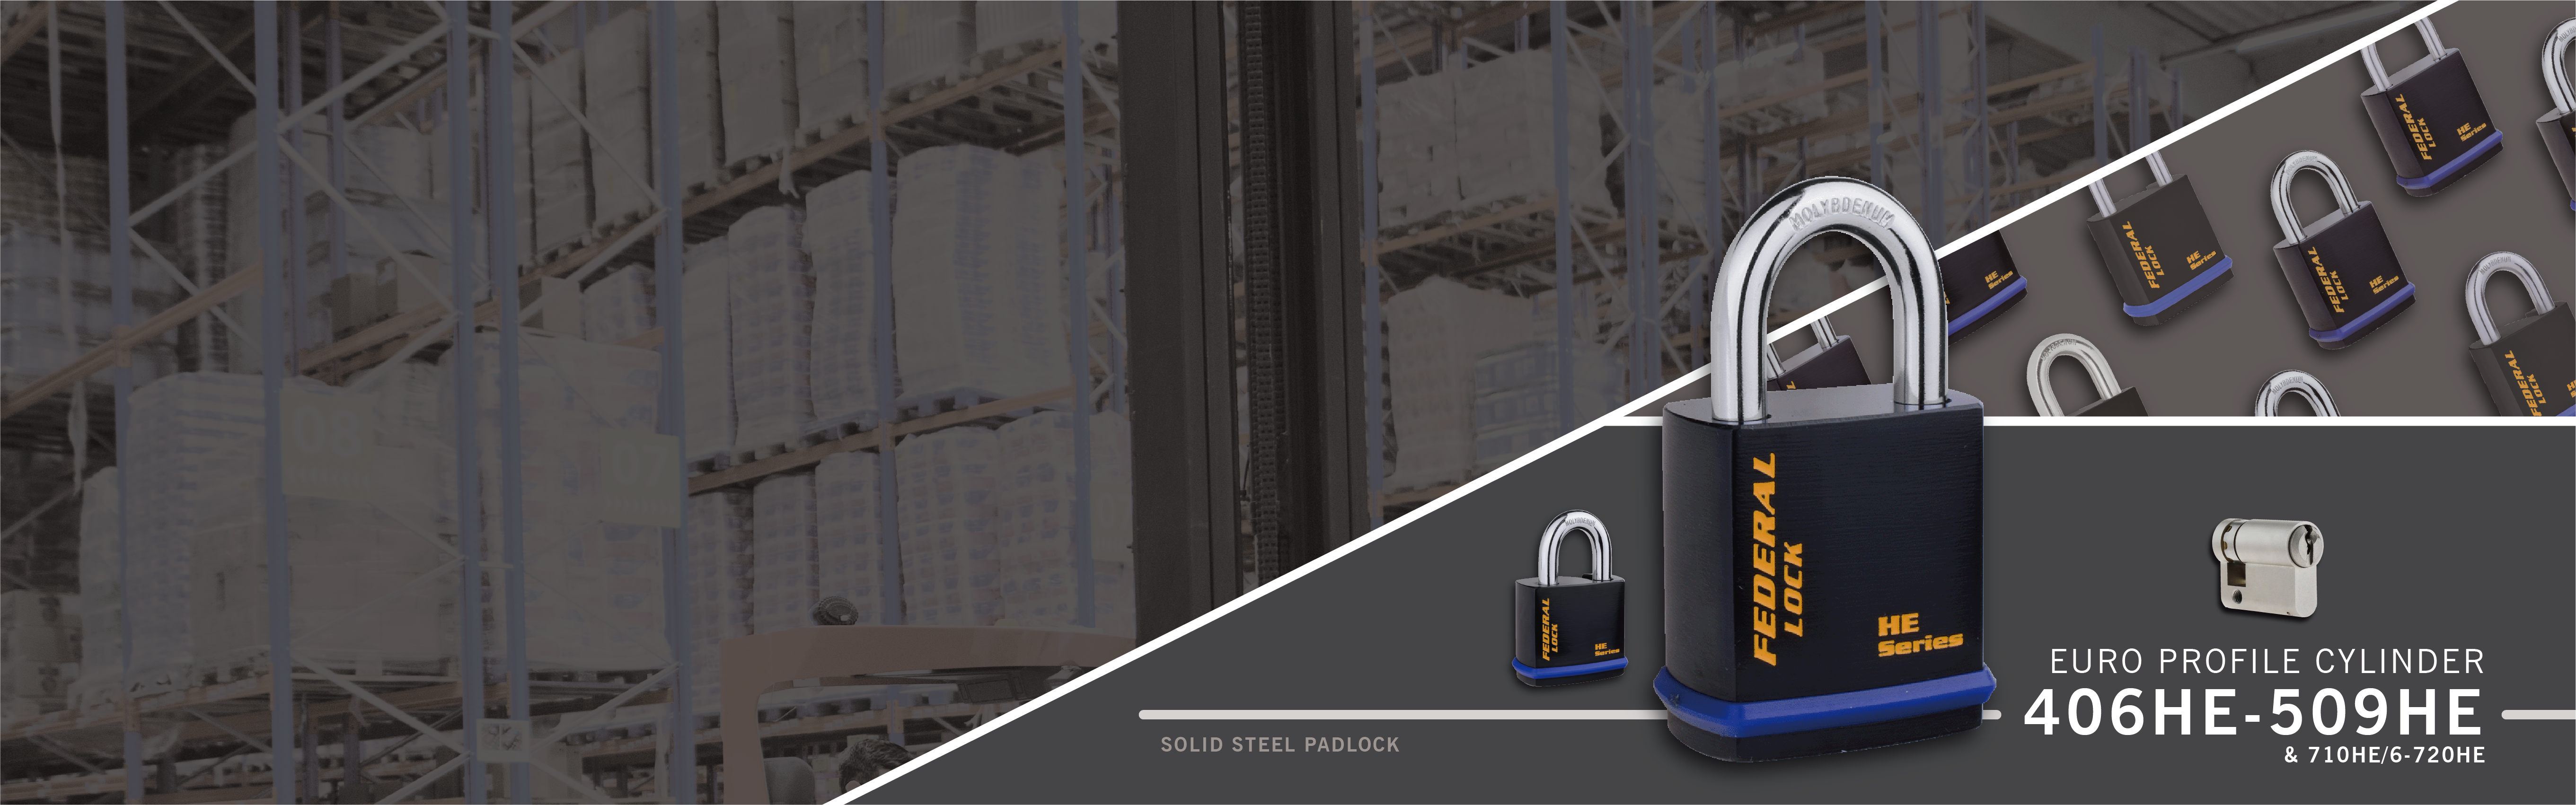 E-coated Hardened Steel Body With Blue Bumper & Molybdenum Shackle Series